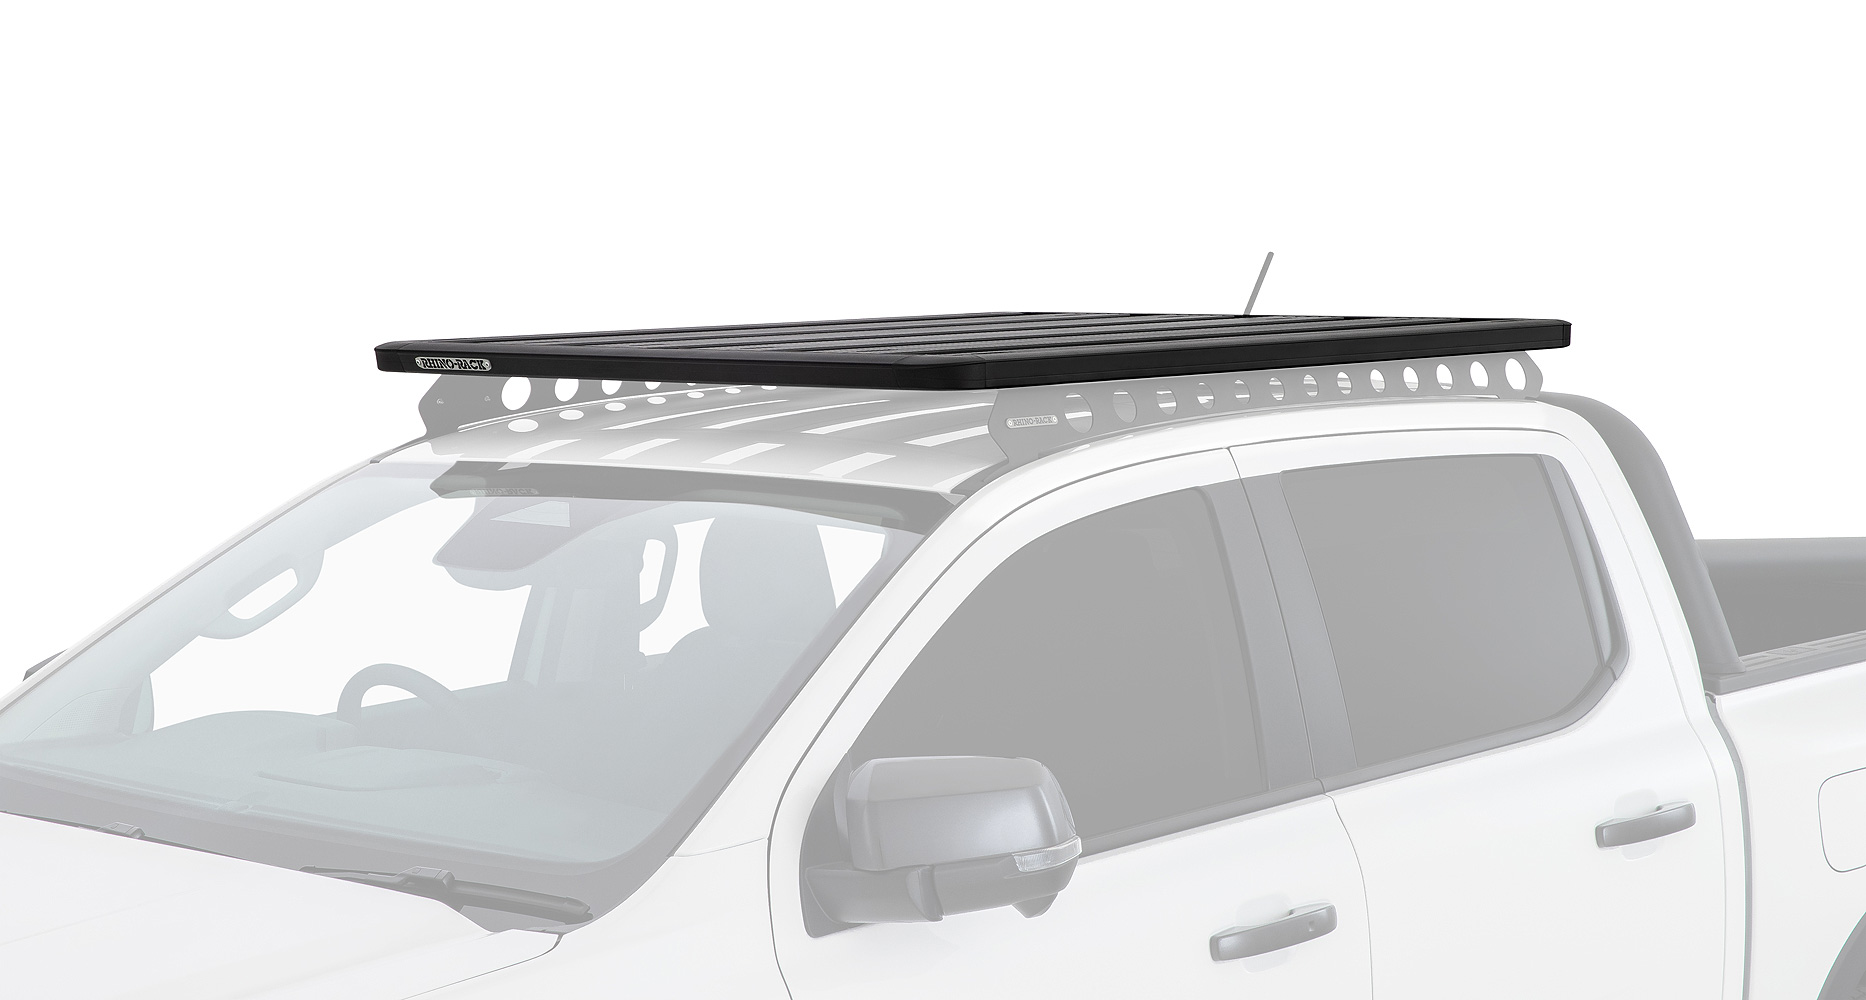 Rhino Rack JC-01542 Pioneer Platform (1528mm x 1236mm) with Backbone for Ford Ranger P703 4dr Ute with Bare Roof (2022 onwards) - Factory Point Mount